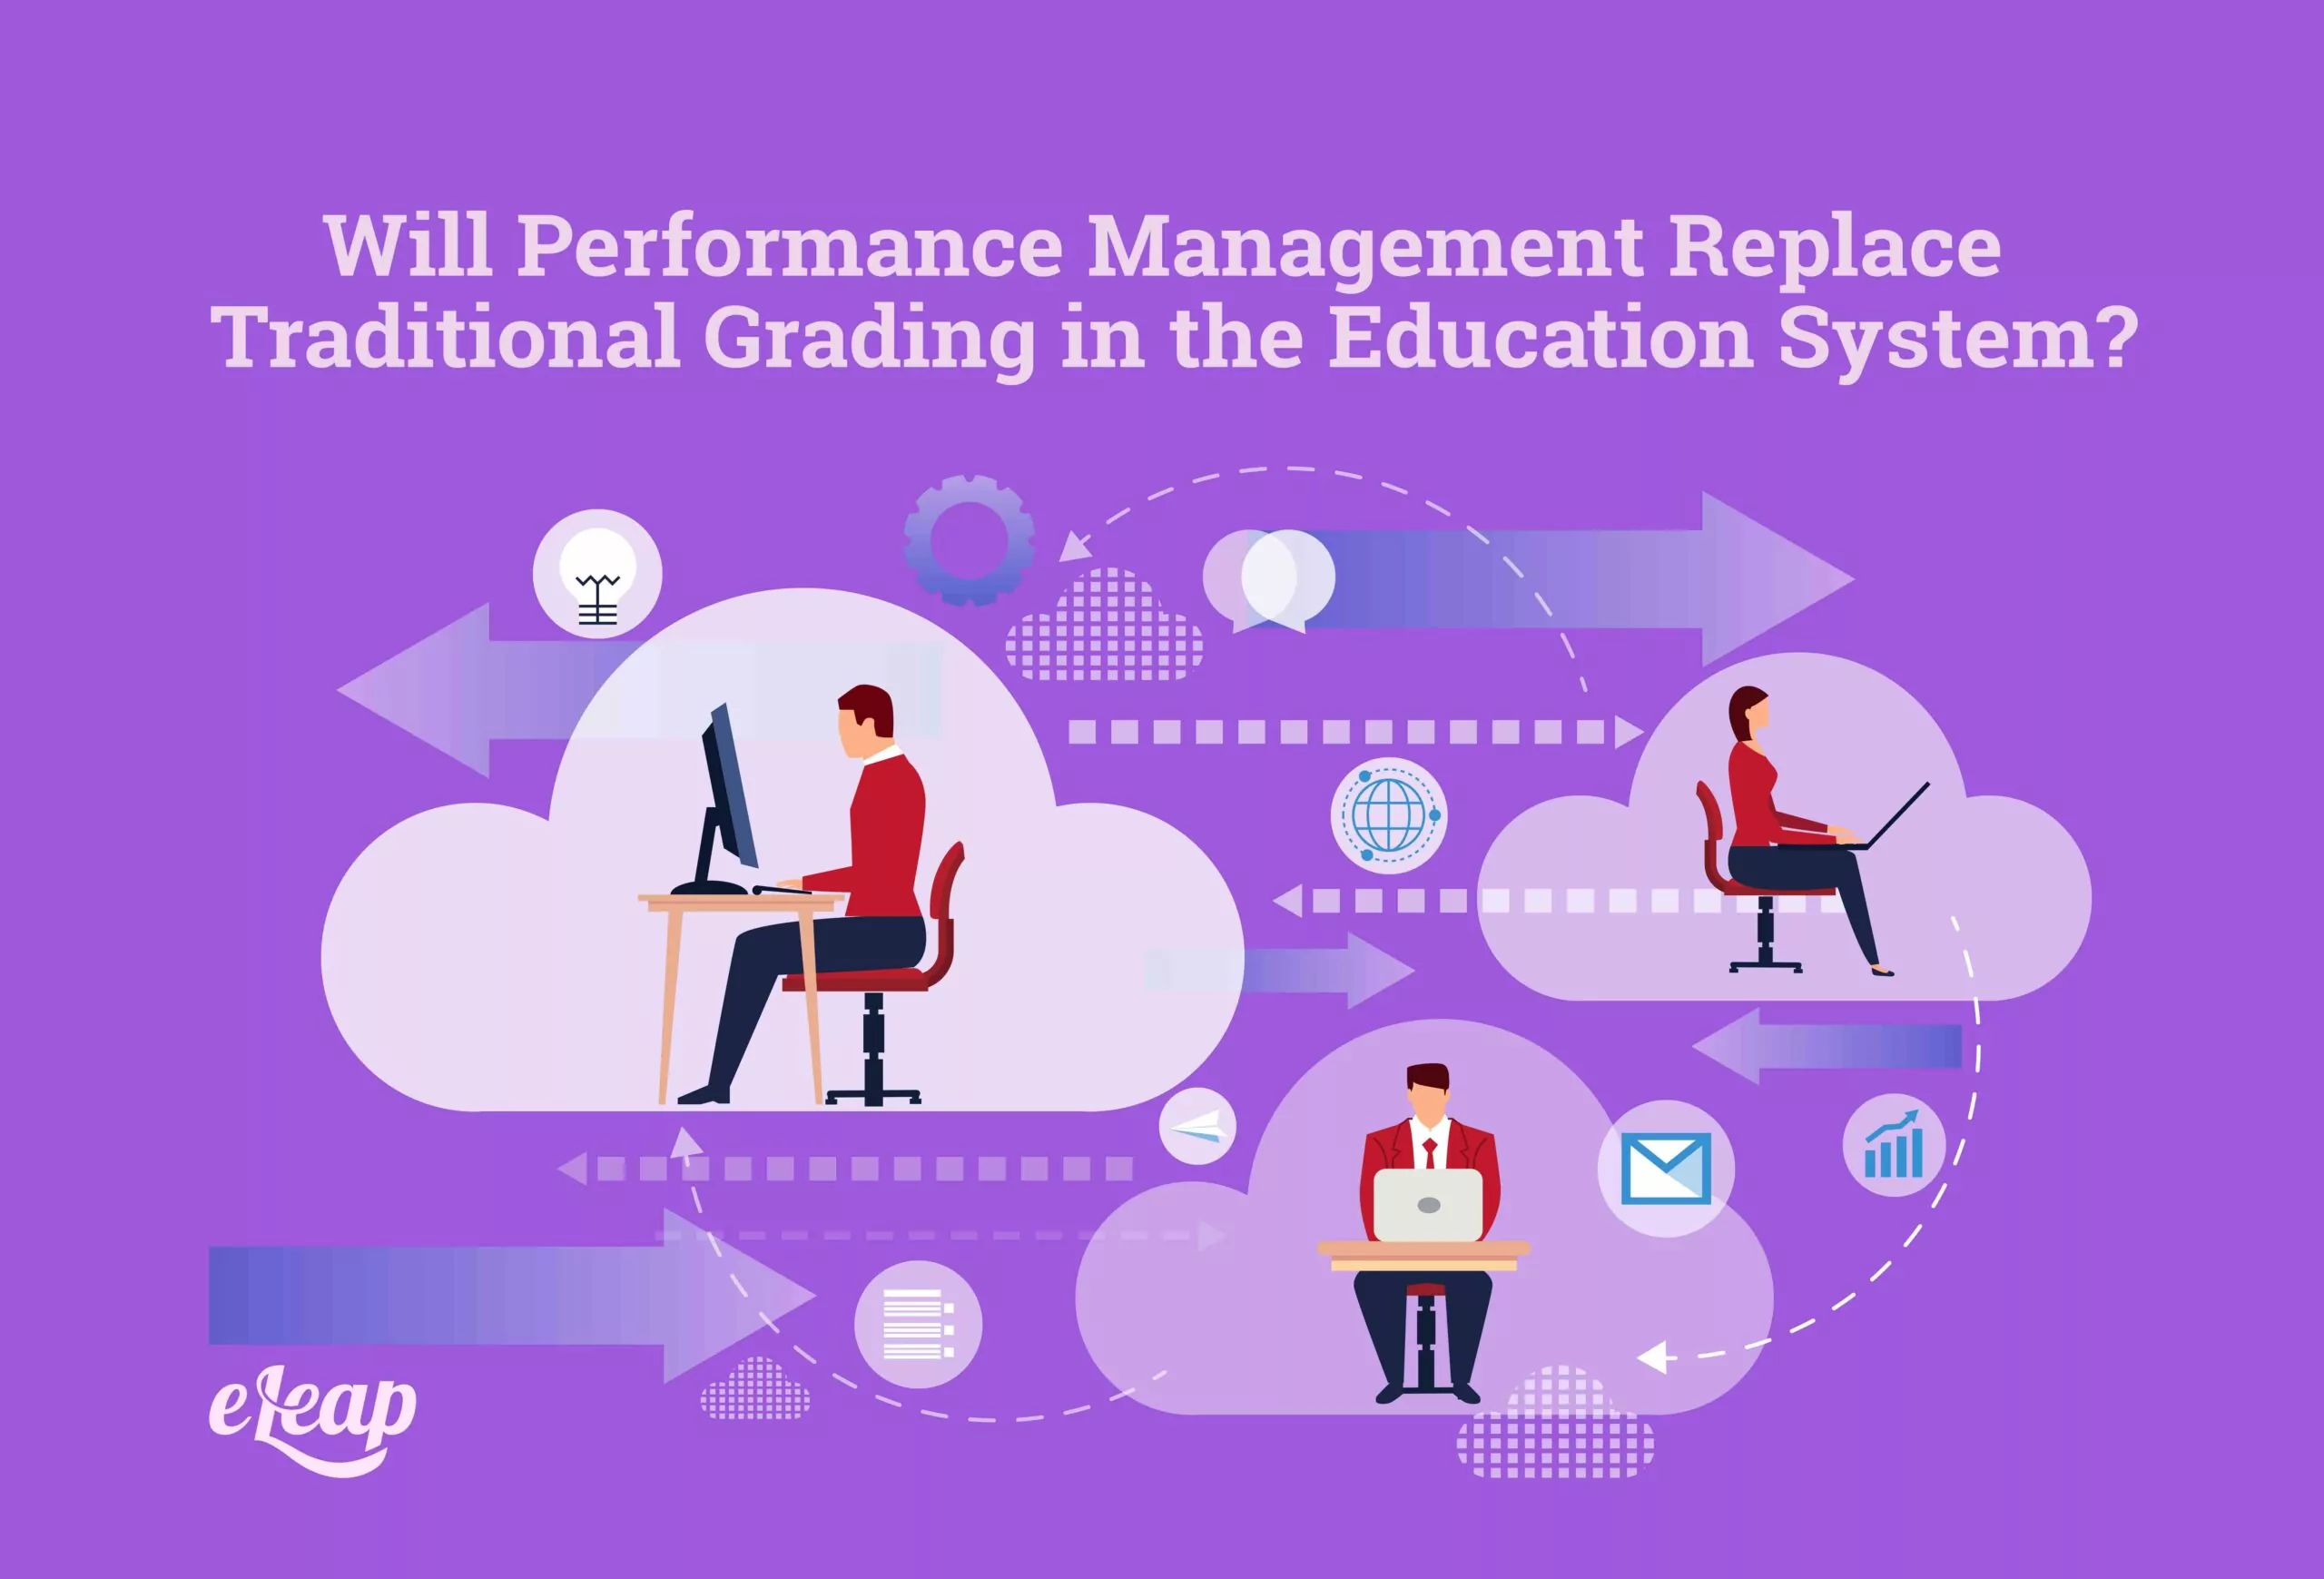 Will Performance Management Replace Traditional Grading in the Education System?